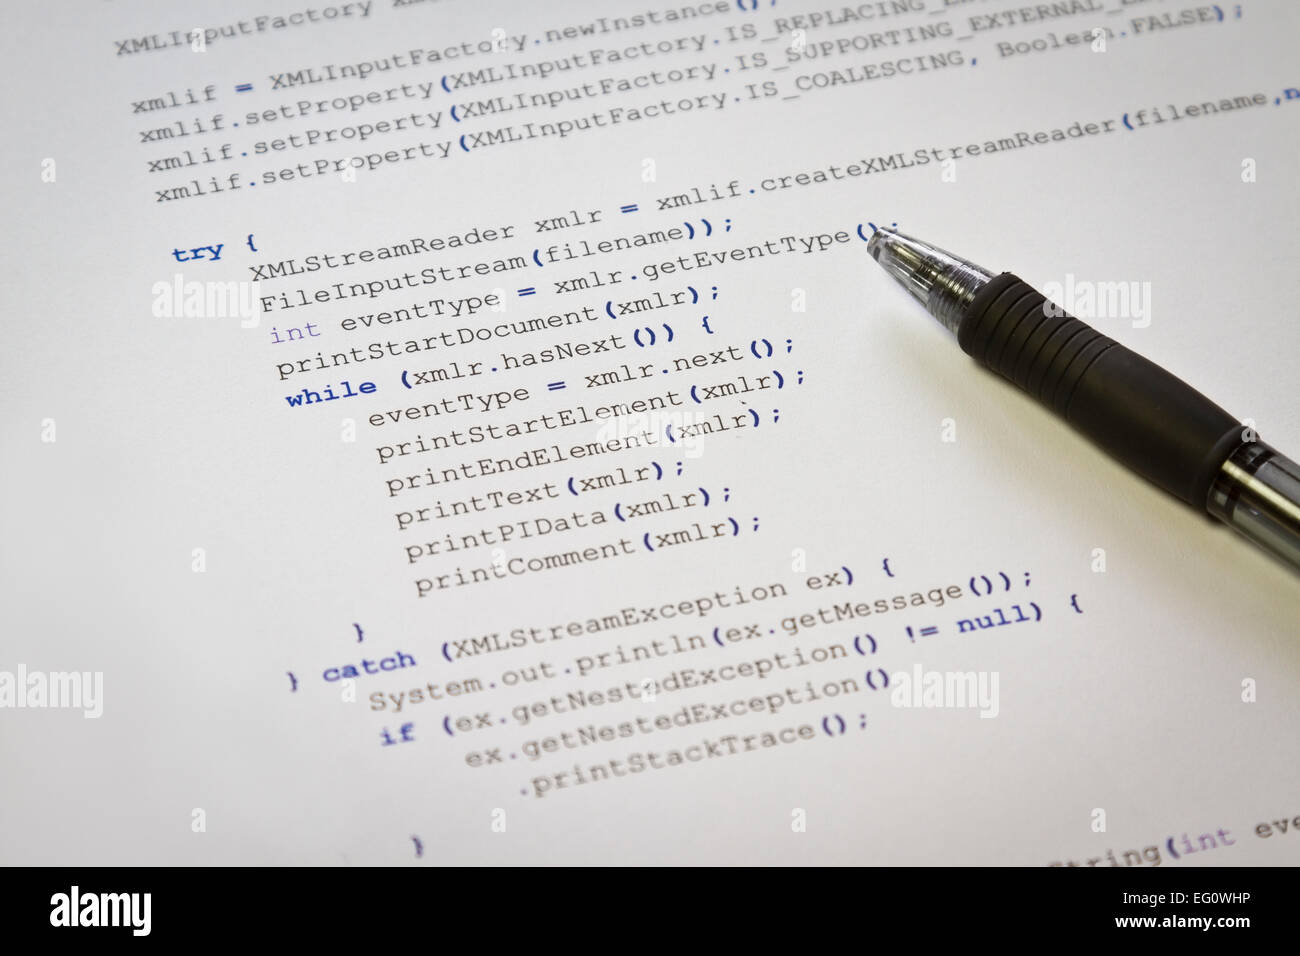 A programmerg with Java computer code. Software / application program code. XML parser. Stock Photo